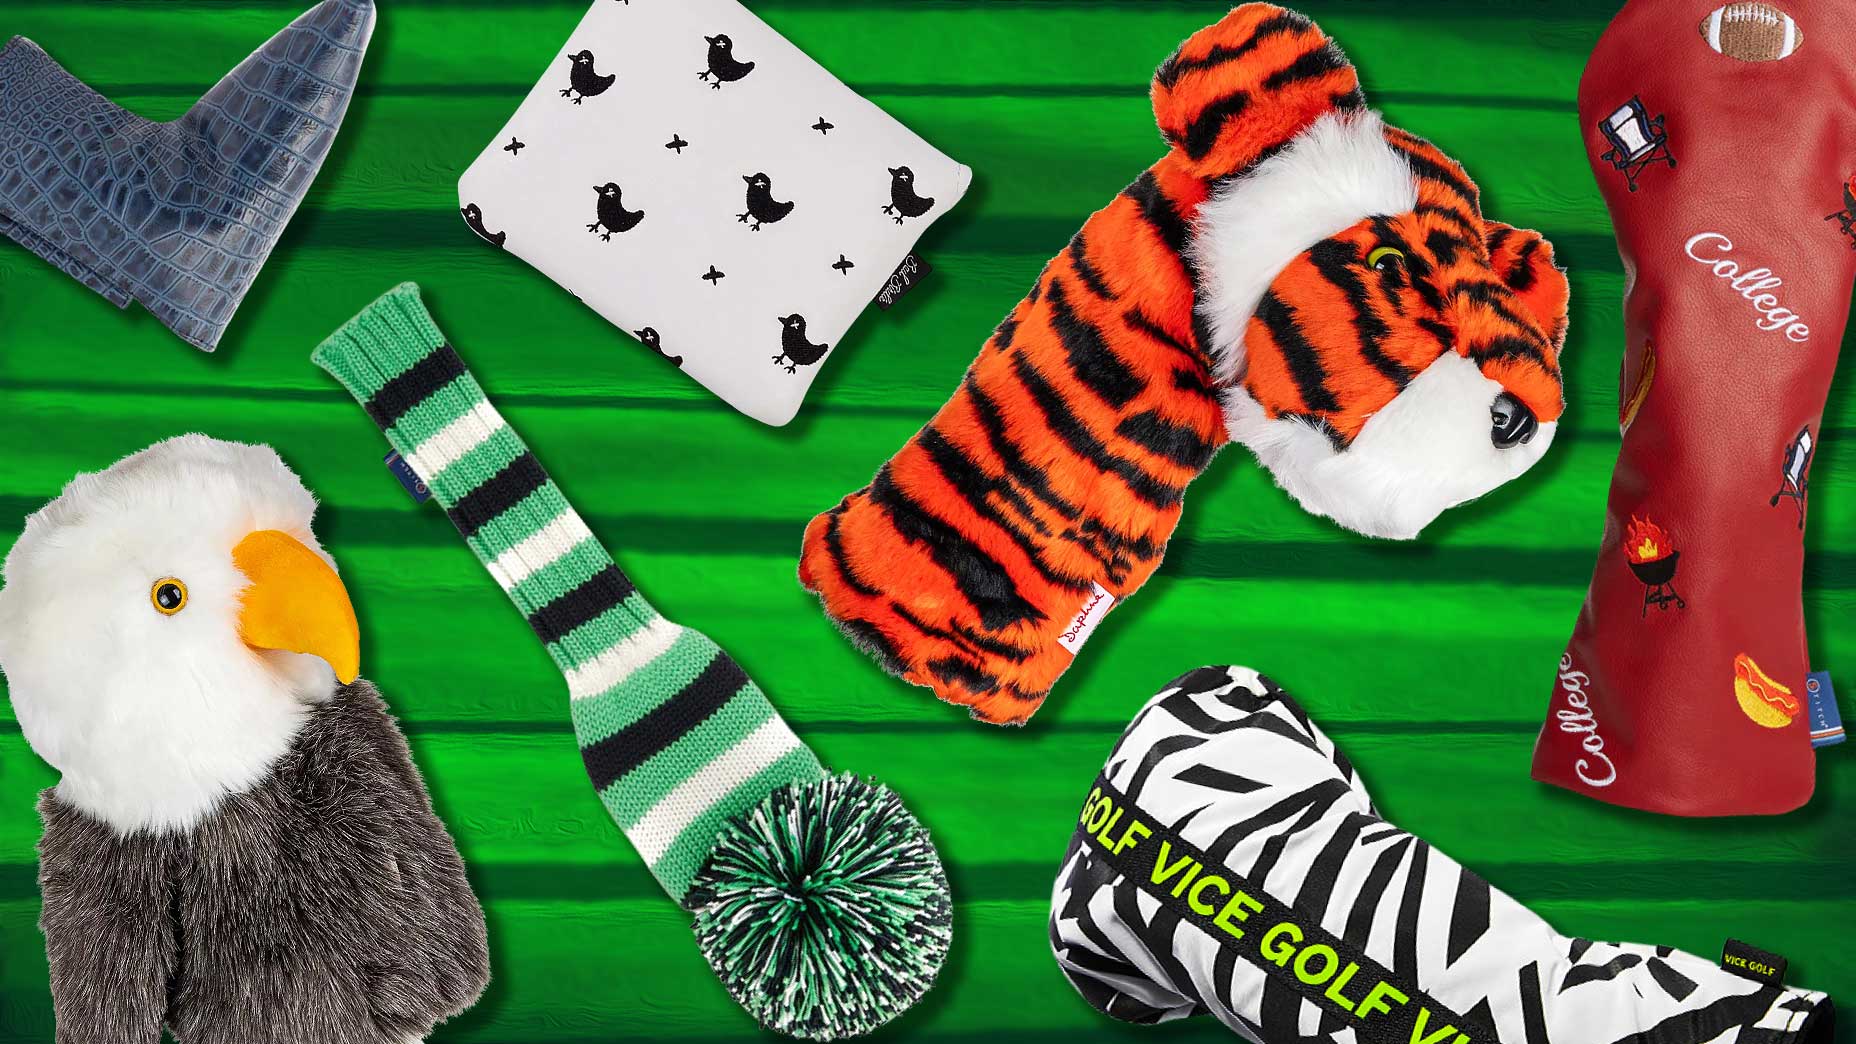 A collection of golf headcovers arranged on a green background